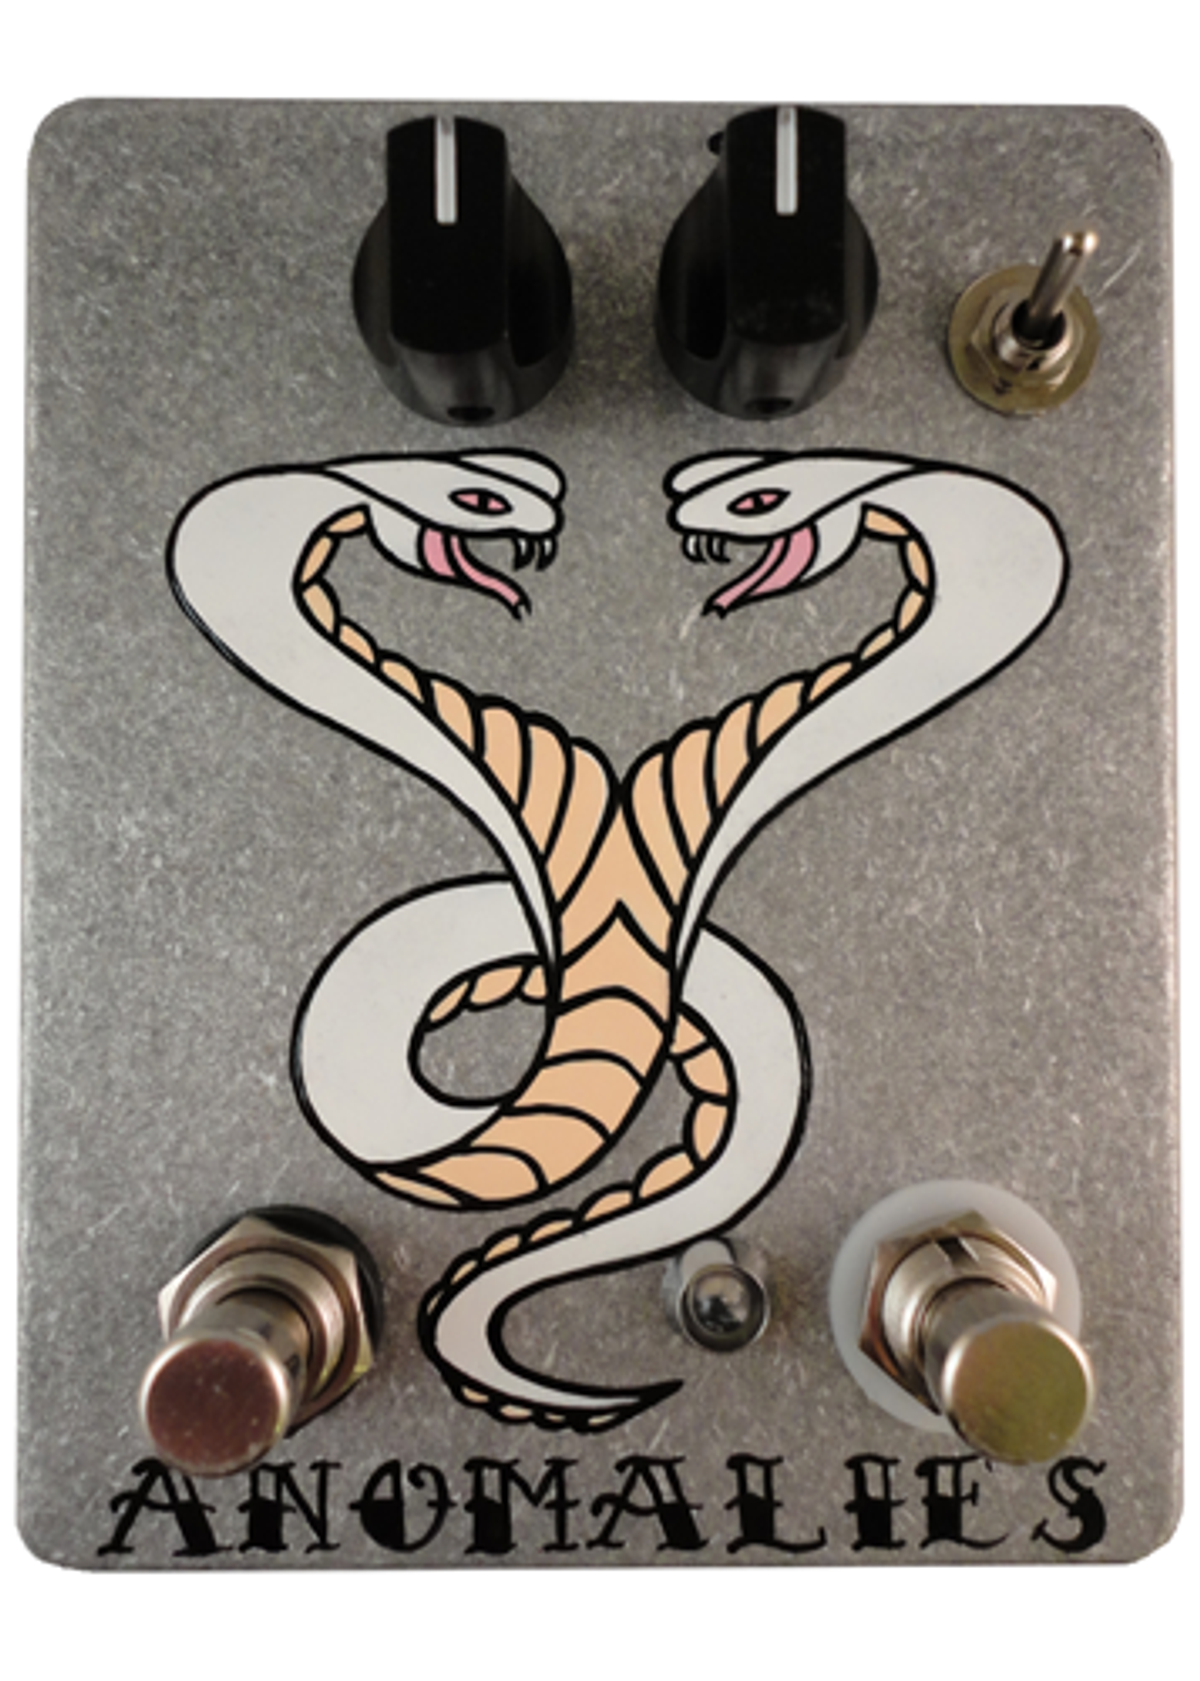 Fuzzrocious Pedals Announces the Anomalies and Feed Me